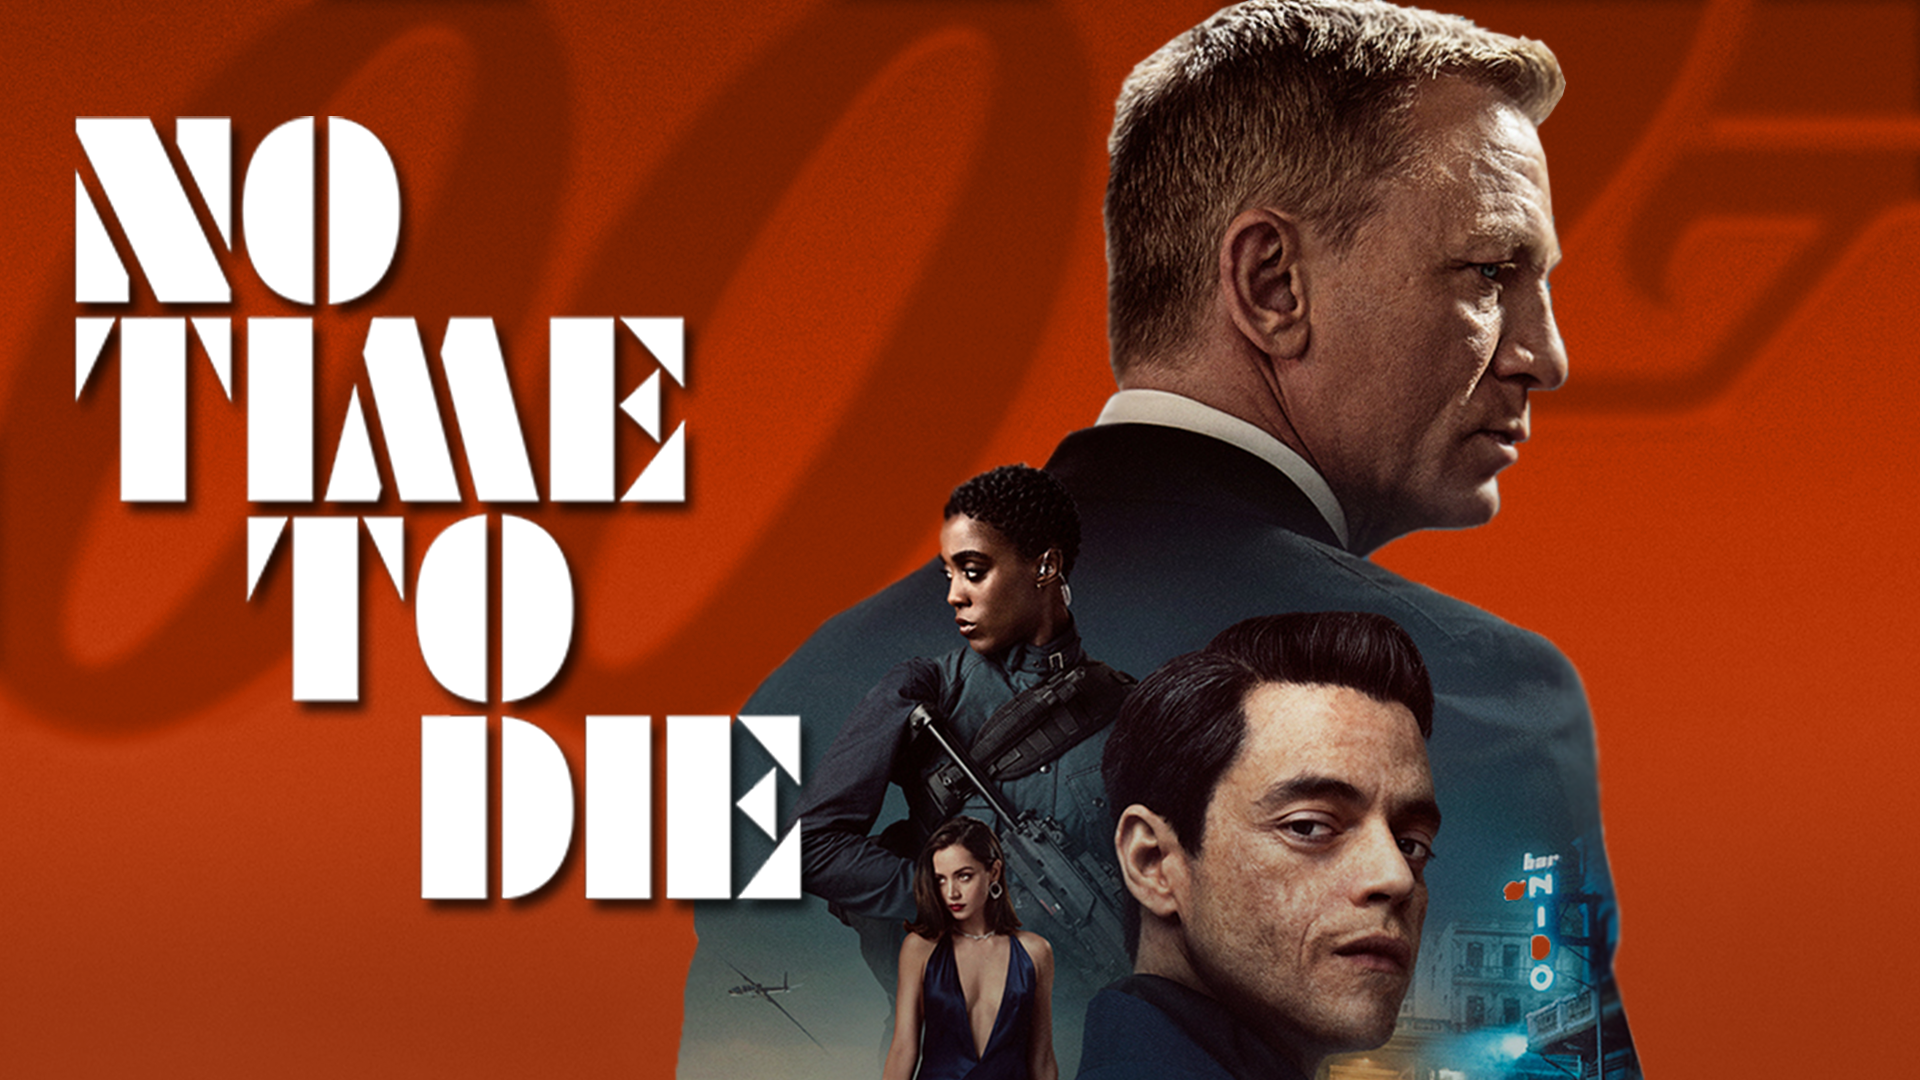 No Time to Die, directed by Cary Joji Fukunaga & starring Daniel Craig, gives this James Bond a send-off with wonderful cinematography, direction & writing.